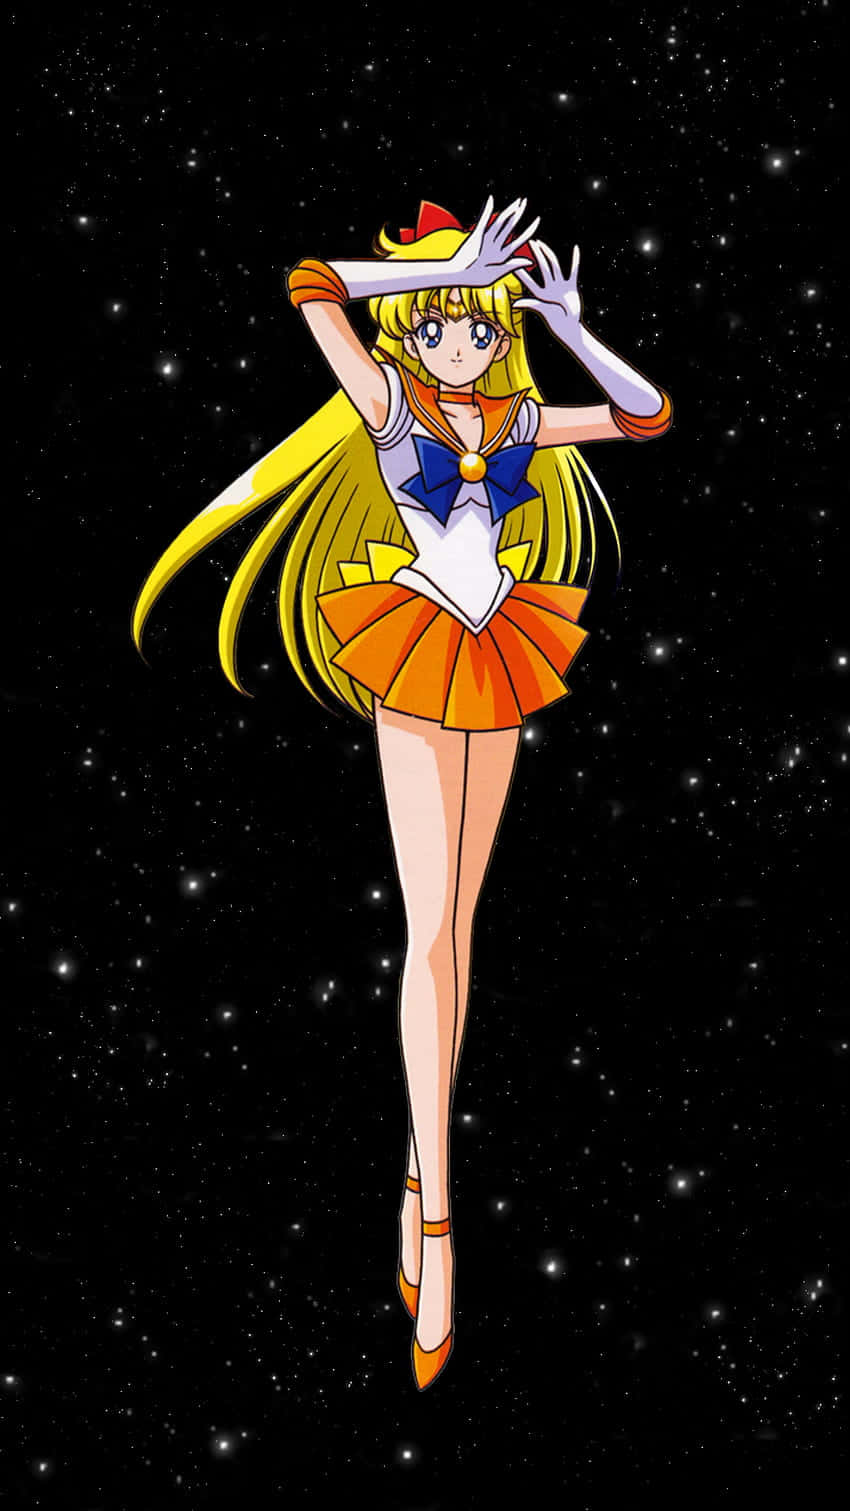 Sailor Venus from the 1990s classic anime, Sailor Moon Wallpaper